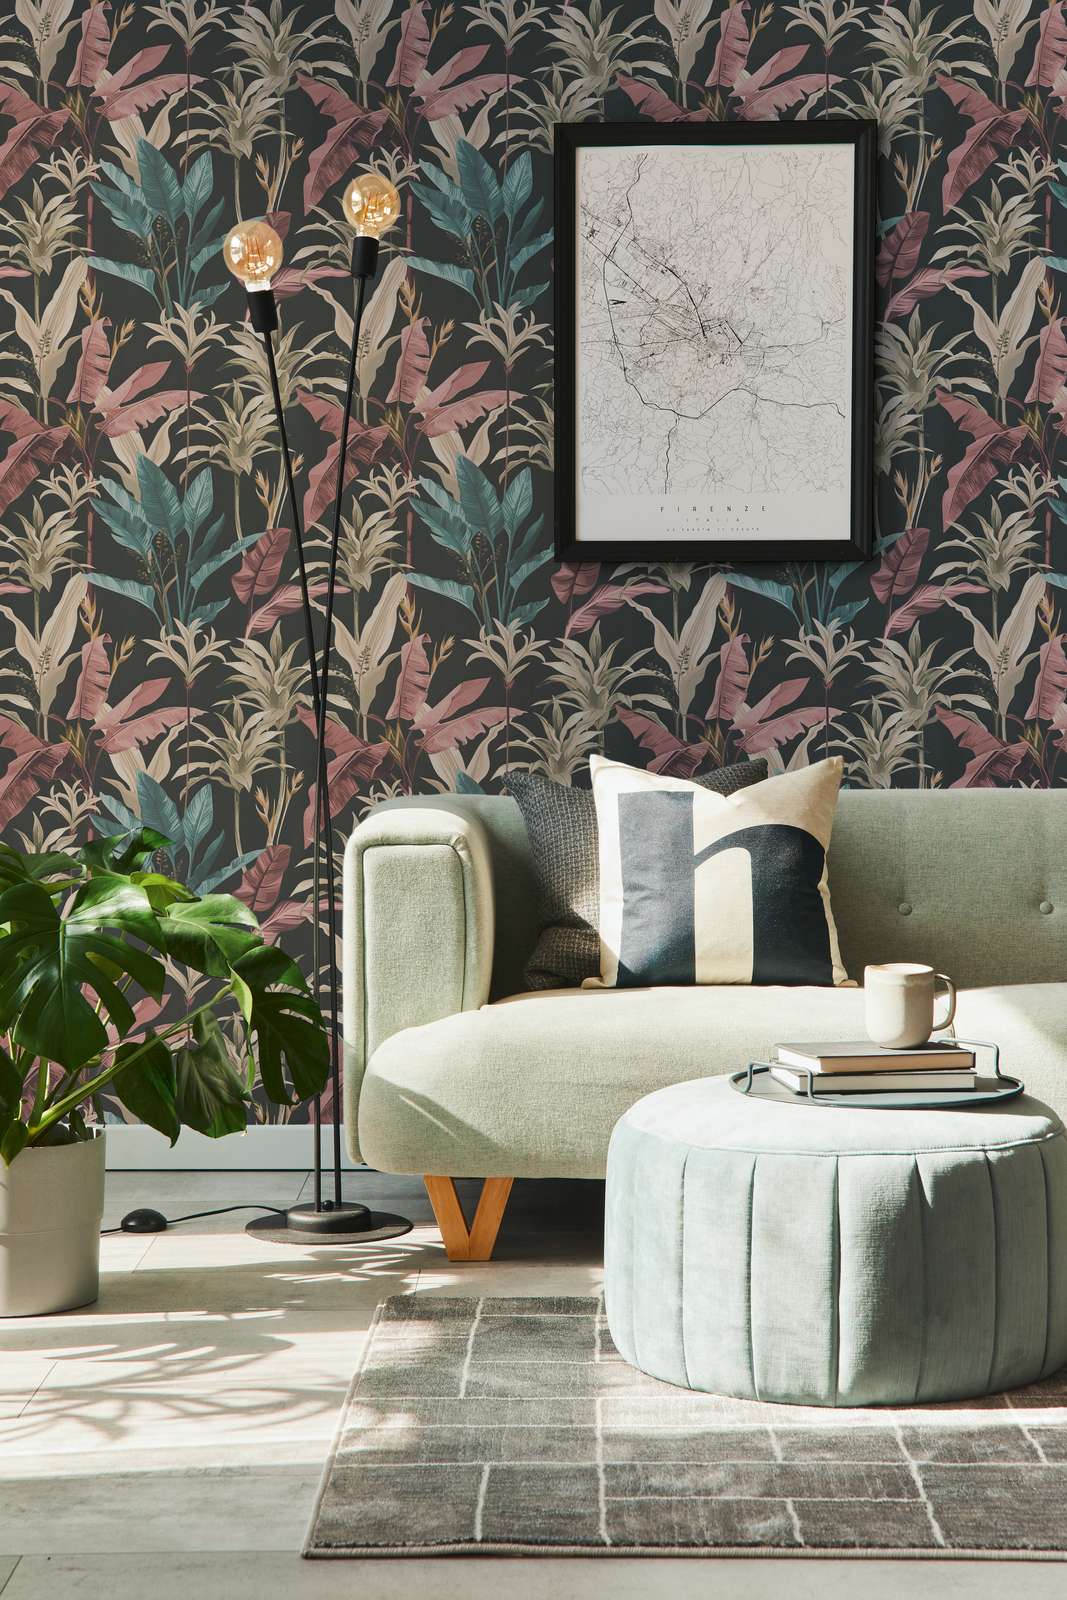             Non-woven wallpaper detailed with floral leaves pattern - blue, pink, brown
        